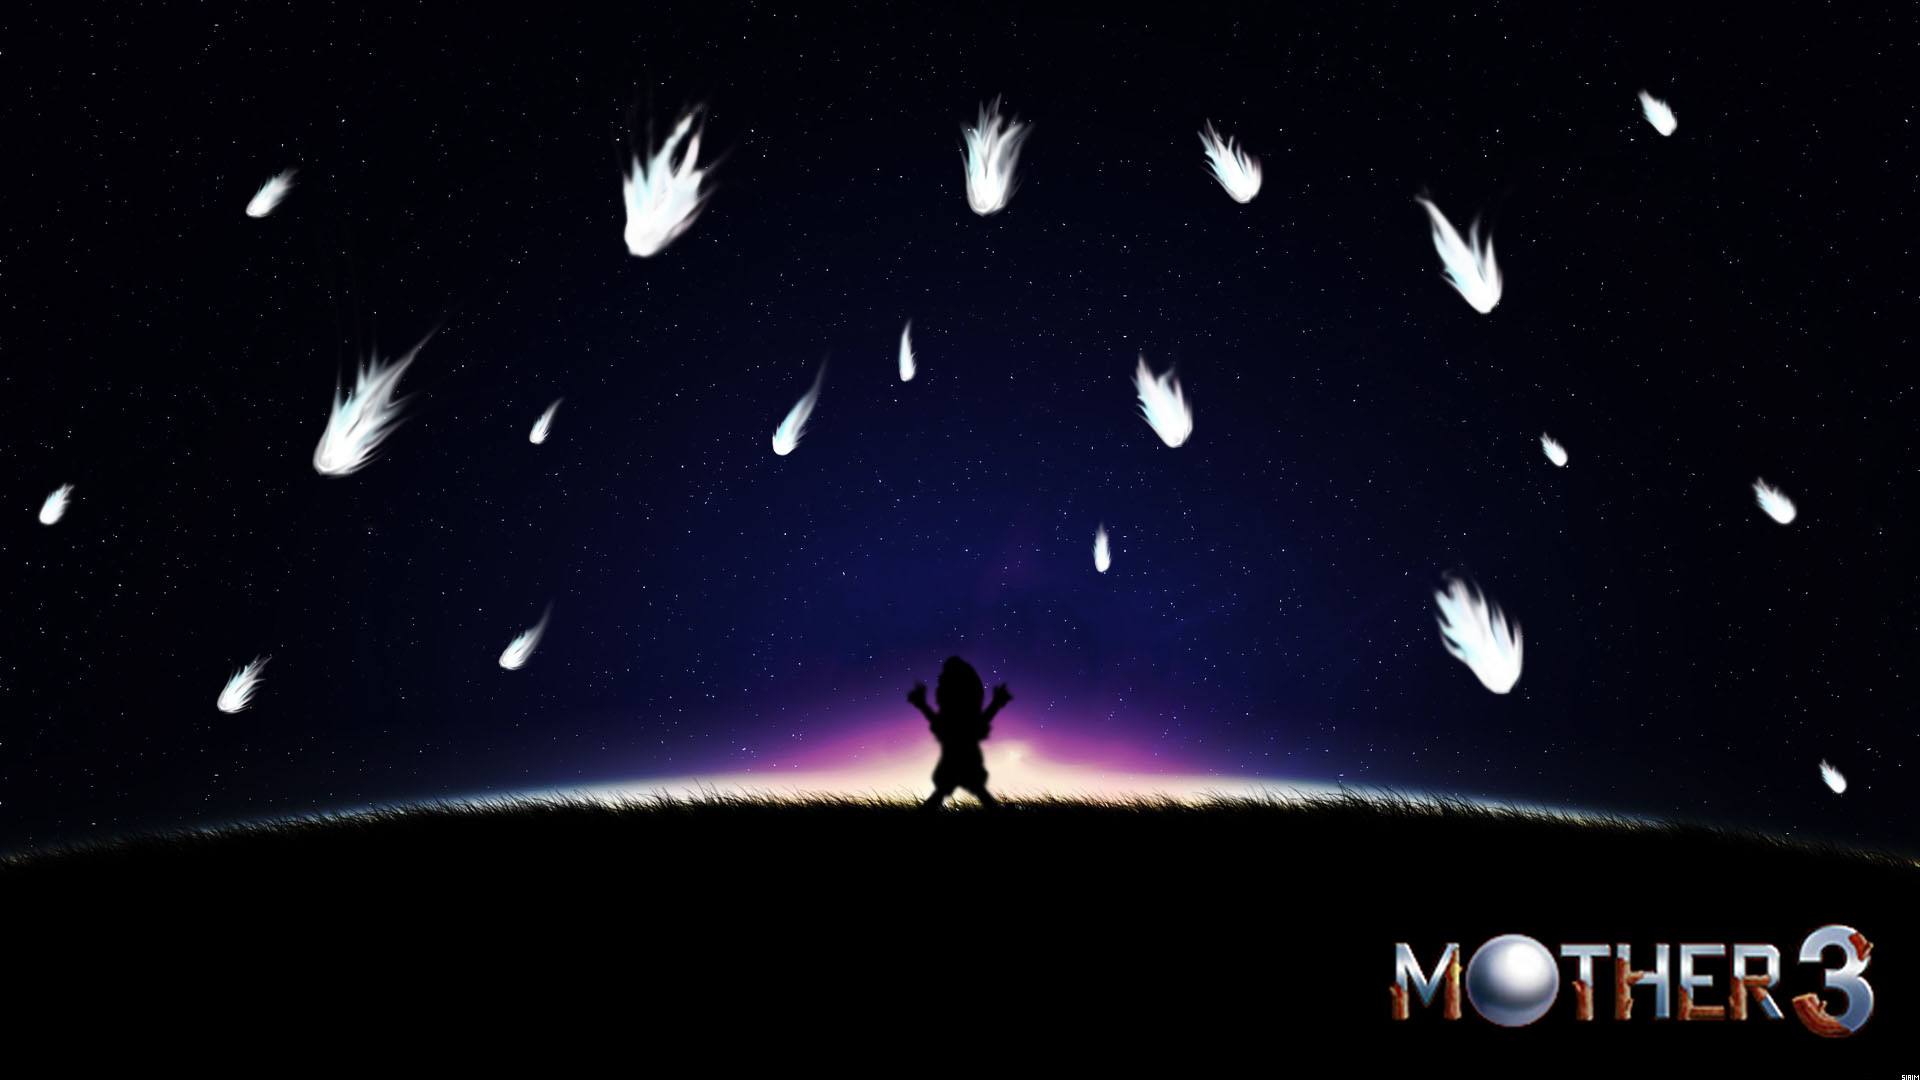 1920x1080 Mother 3 Wallpaper by s1a1m Mother 3 Wallpaper by s1a1m